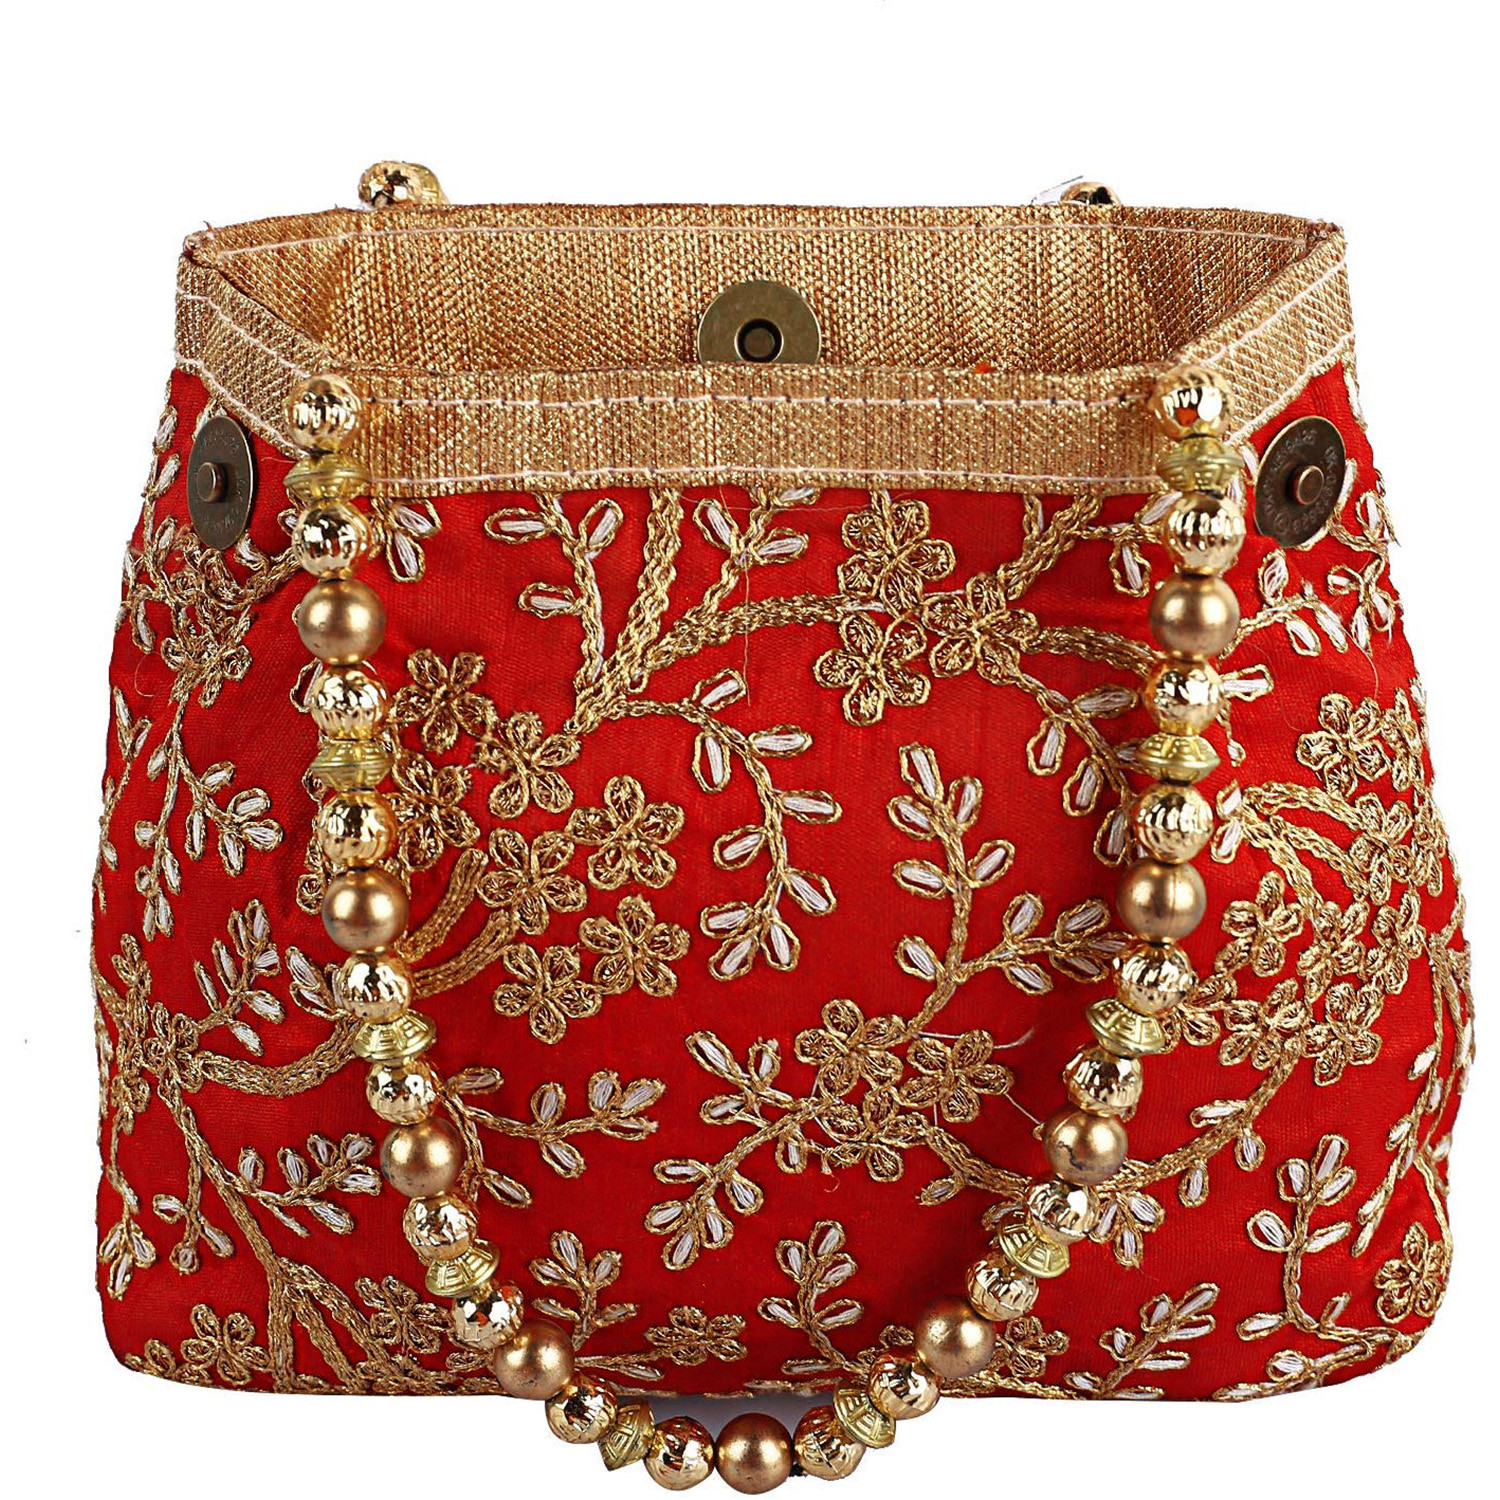 Kuber Industries Attractive Embroidery Polyester Hand Purse & Artificial Pearls Handle With 3 Magnetic Lock for Woman,Girls (Red)